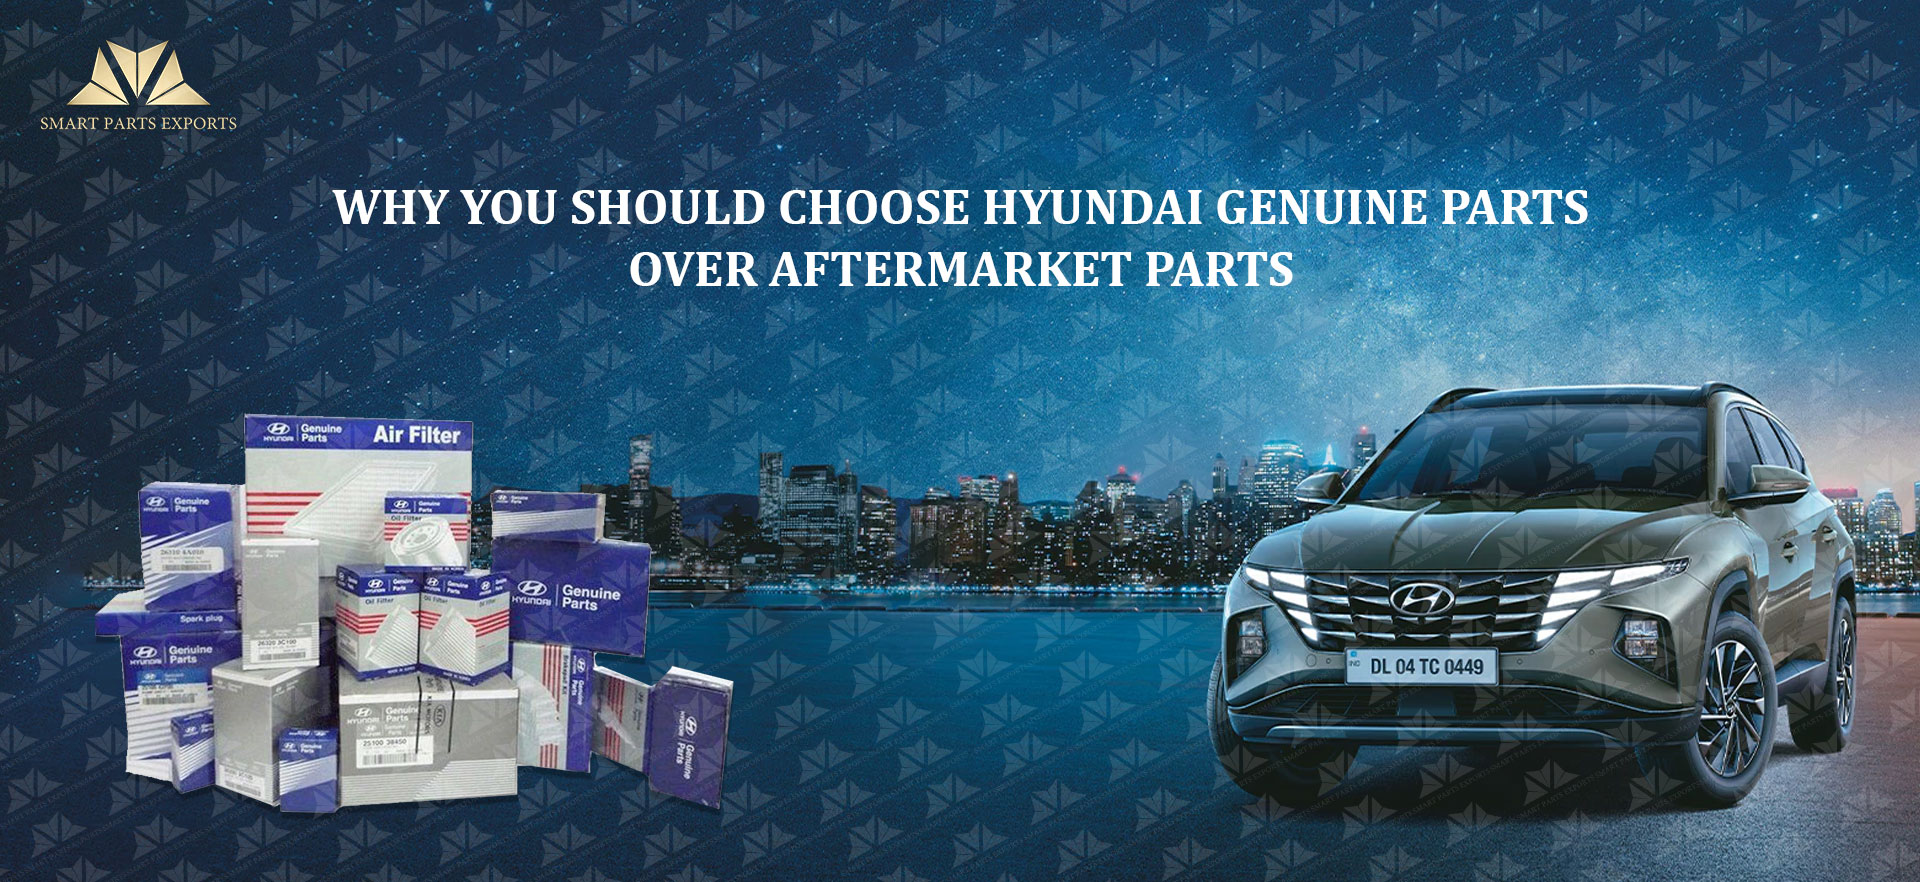 Why You Should Choose Hyundai Genuine Parts over Aftermarket Parts